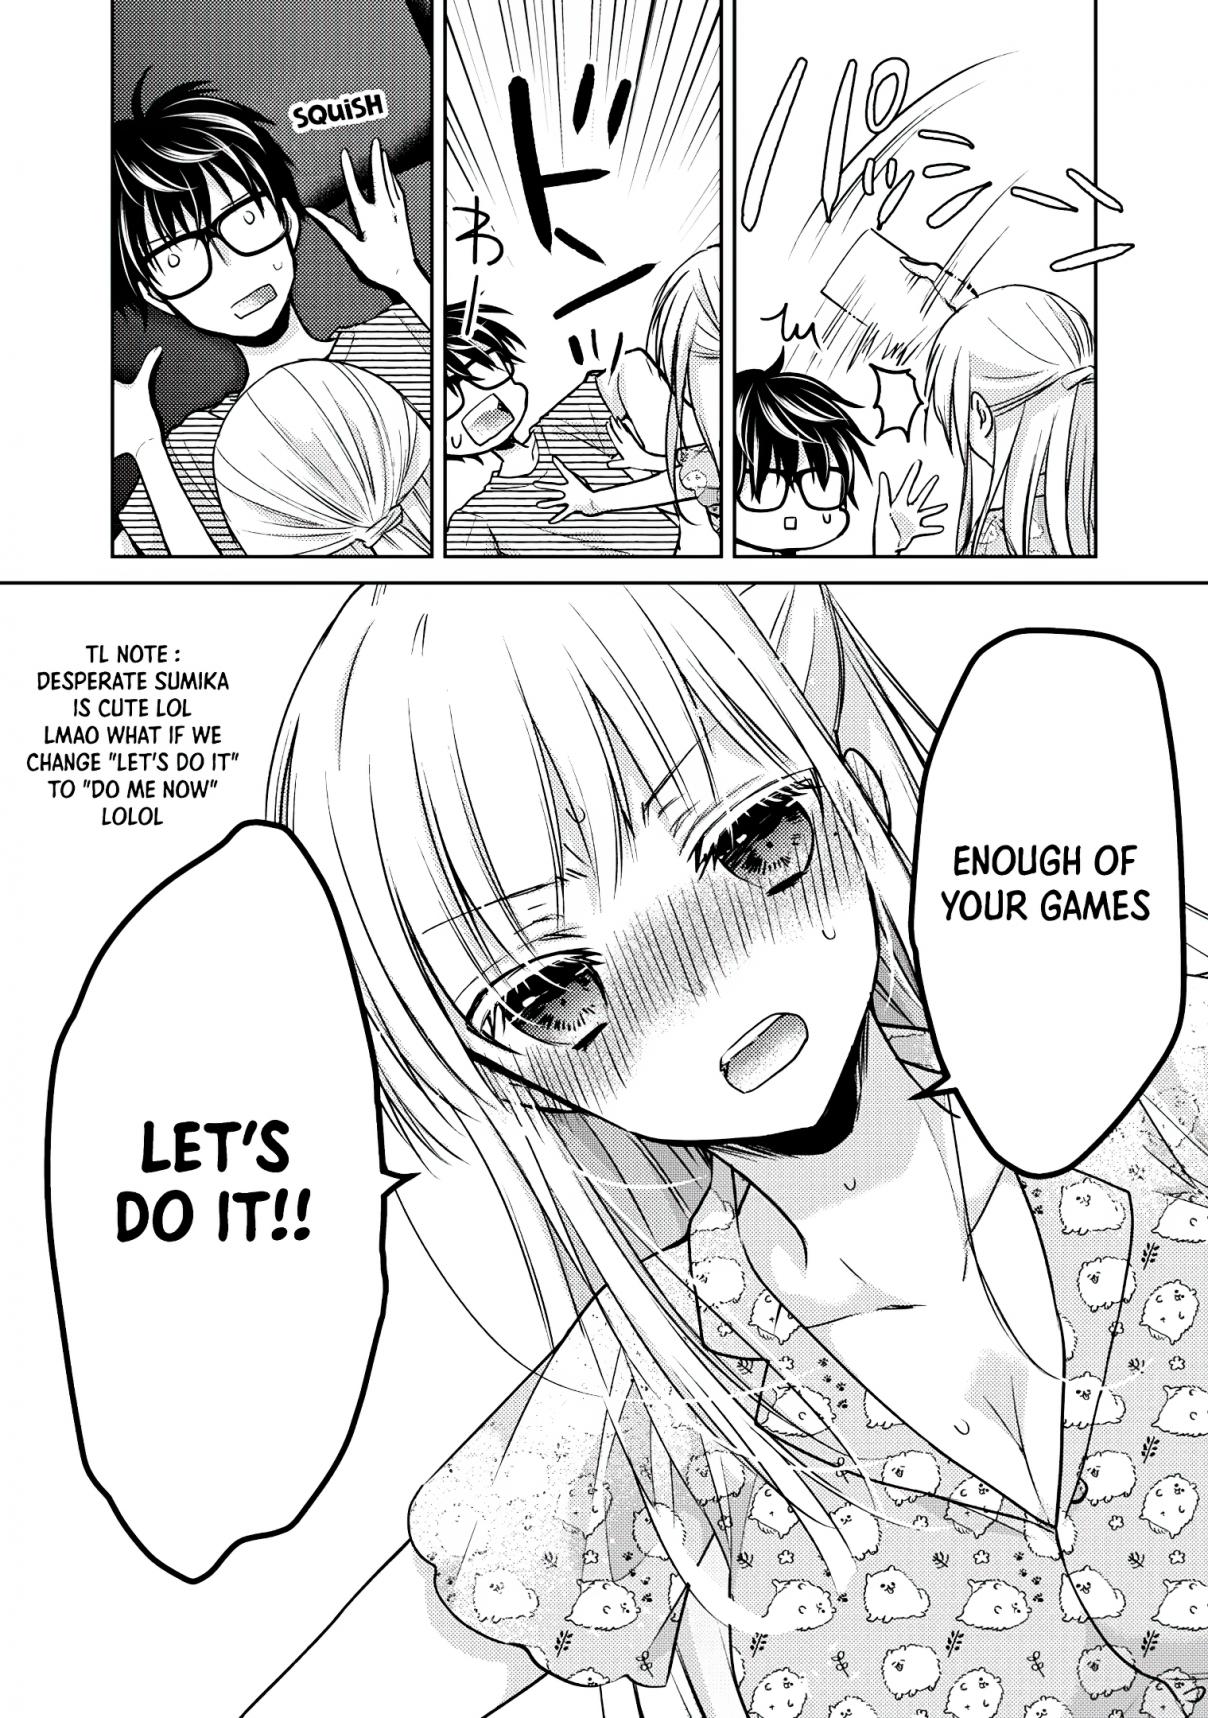 We May Be an Inexperienced Couple but... Vol. 5 Ch. 43 I Want It